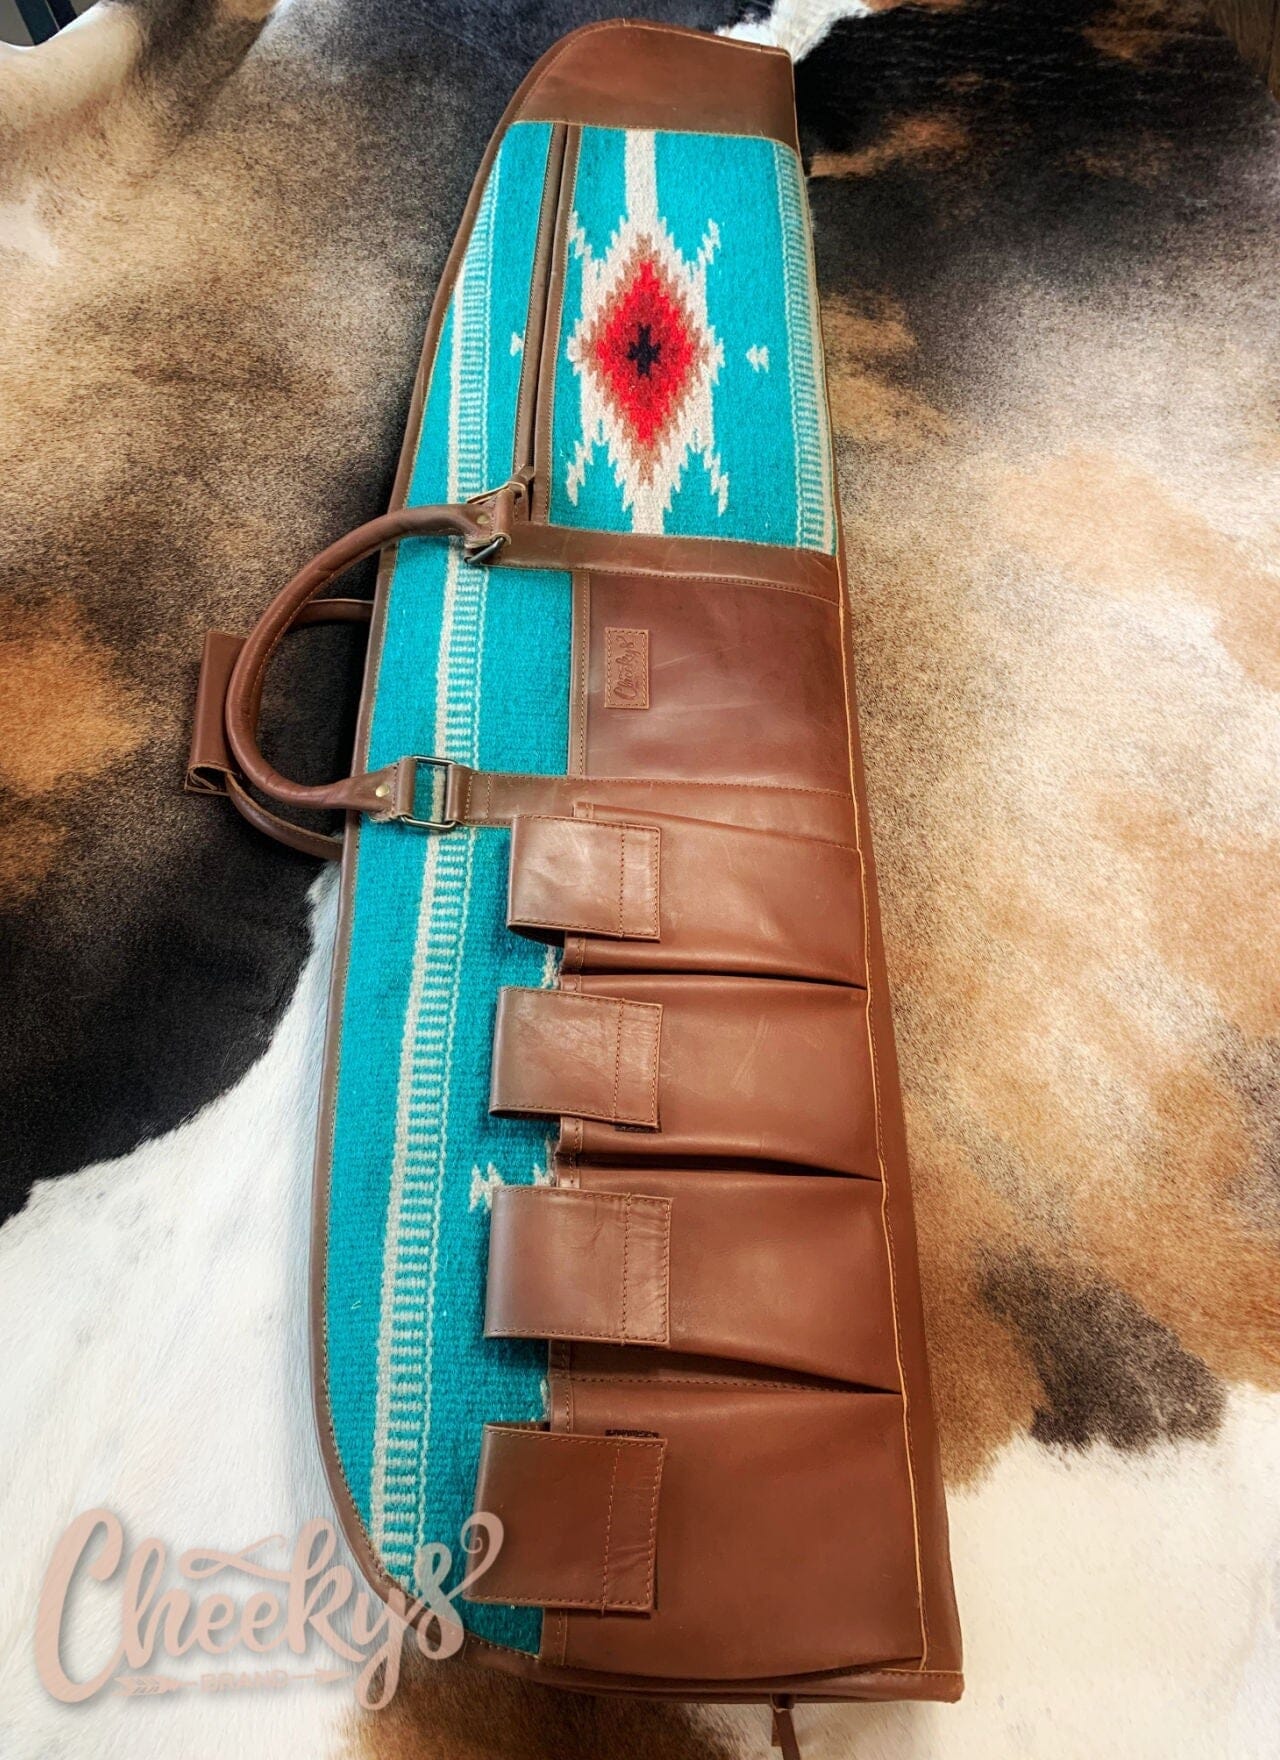 Grissom Aztec Saddle Blanket Long Protection Case Accessories Cheekys Brand 